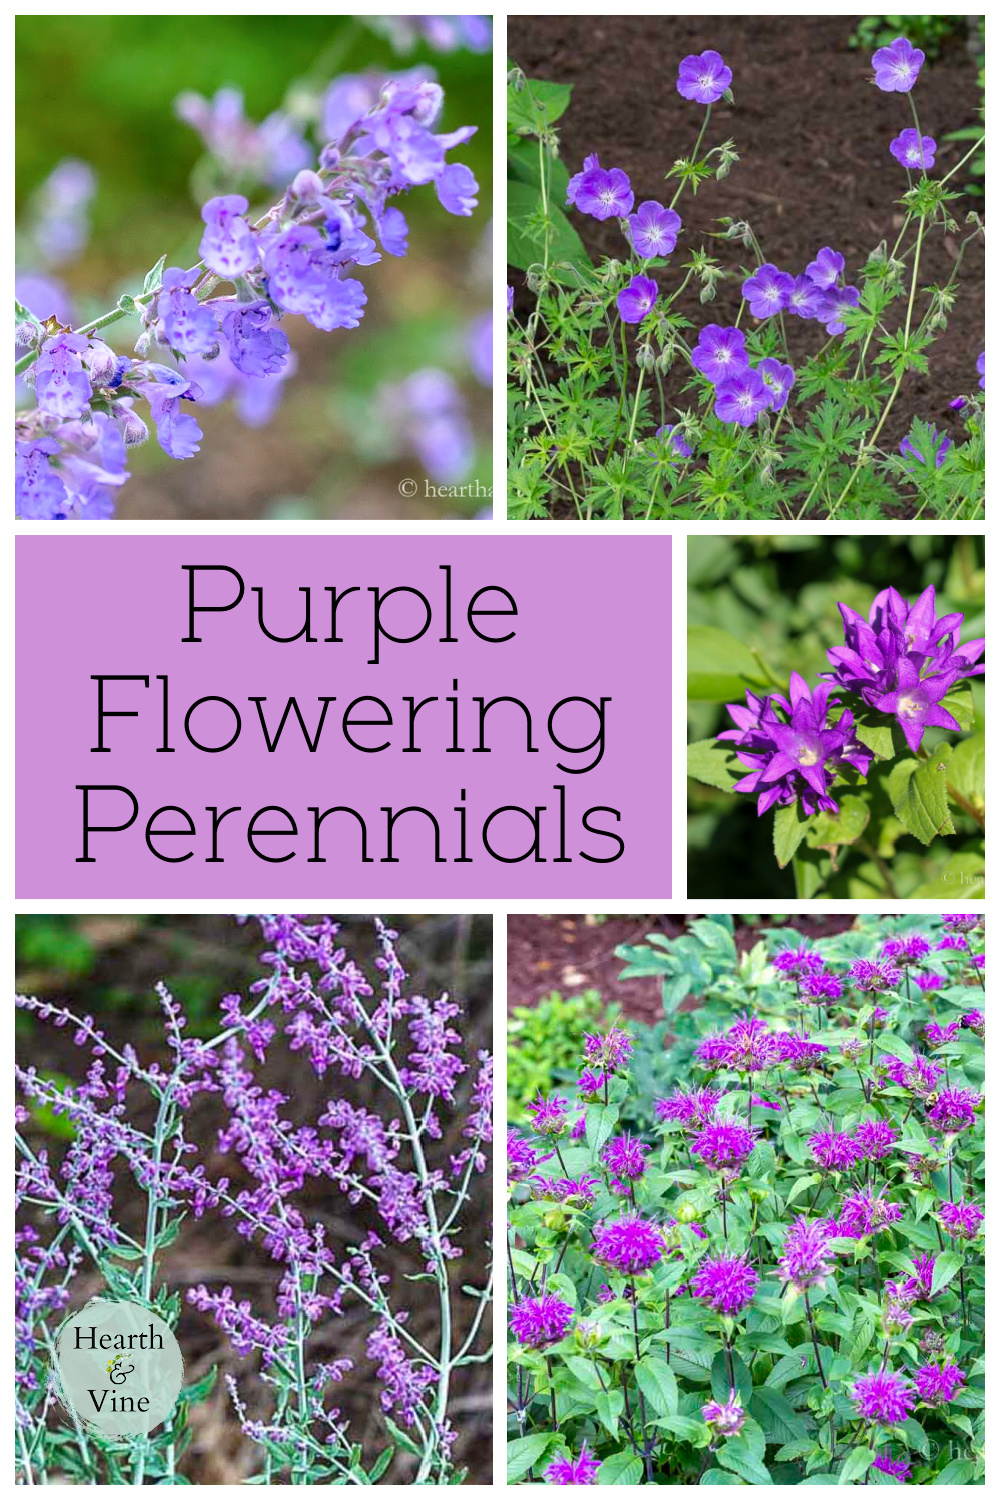 Collage of purple perennial flowers including catmint, bellflower, geranium, Russian sage and beebalm.